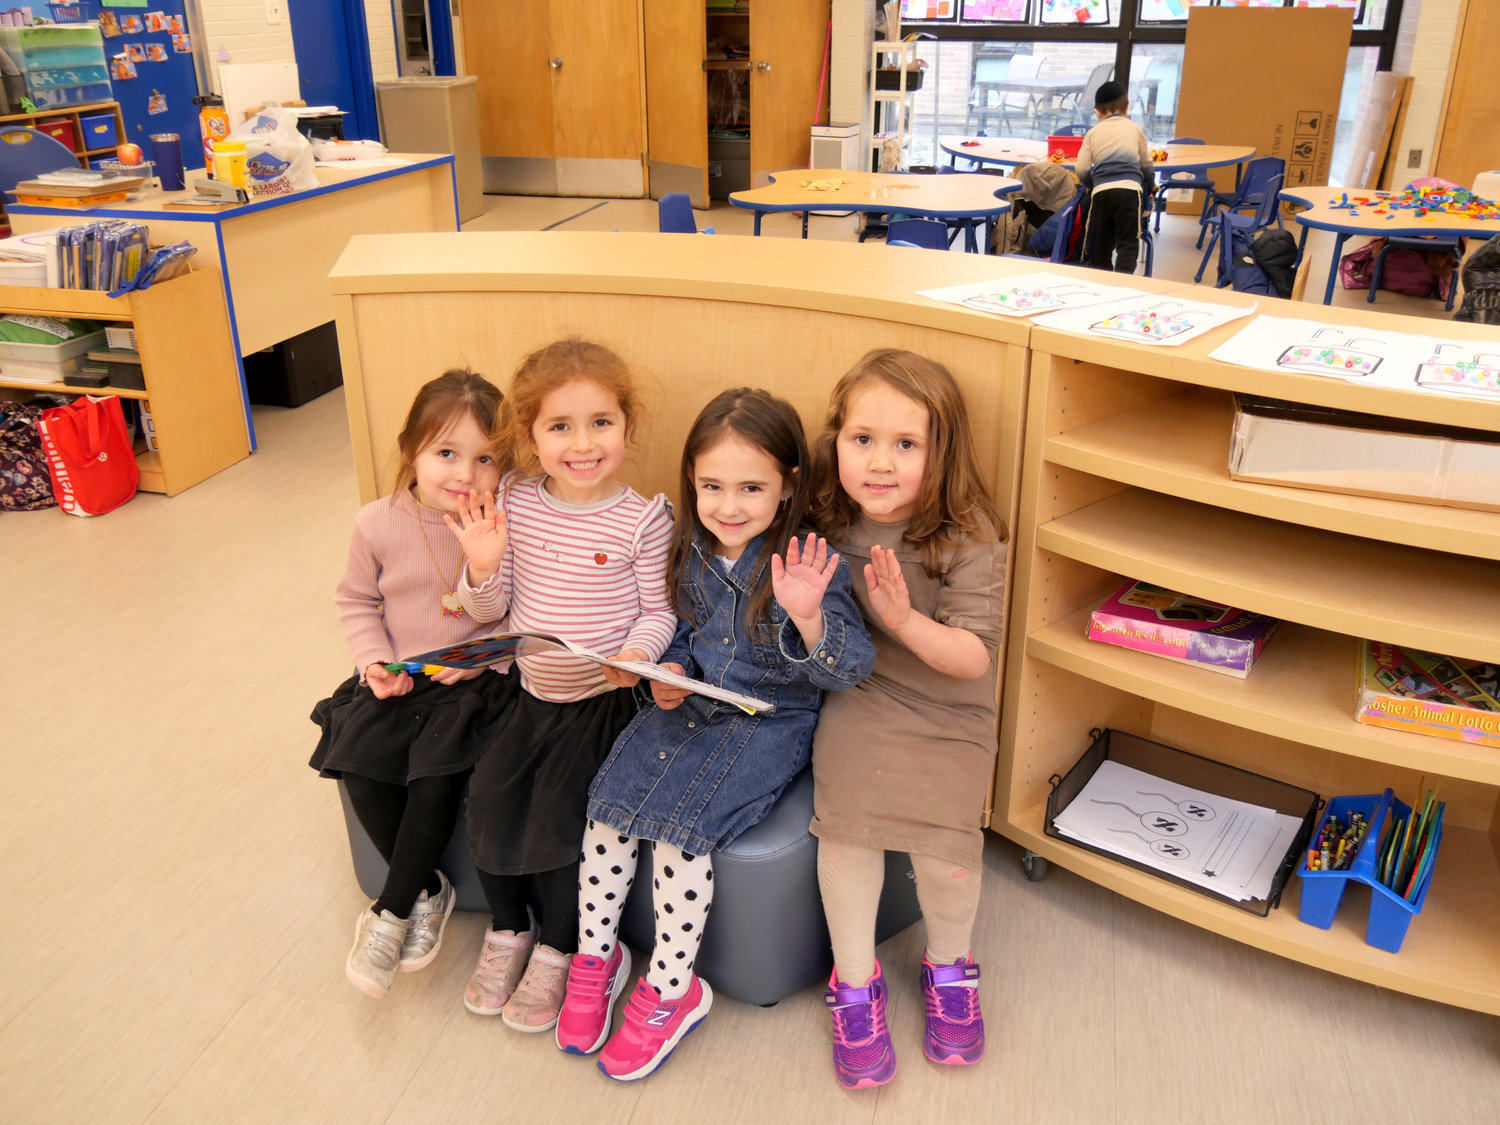 PHDS Pre-K students enjoy the new furniture in the renovated early childhood classroom.